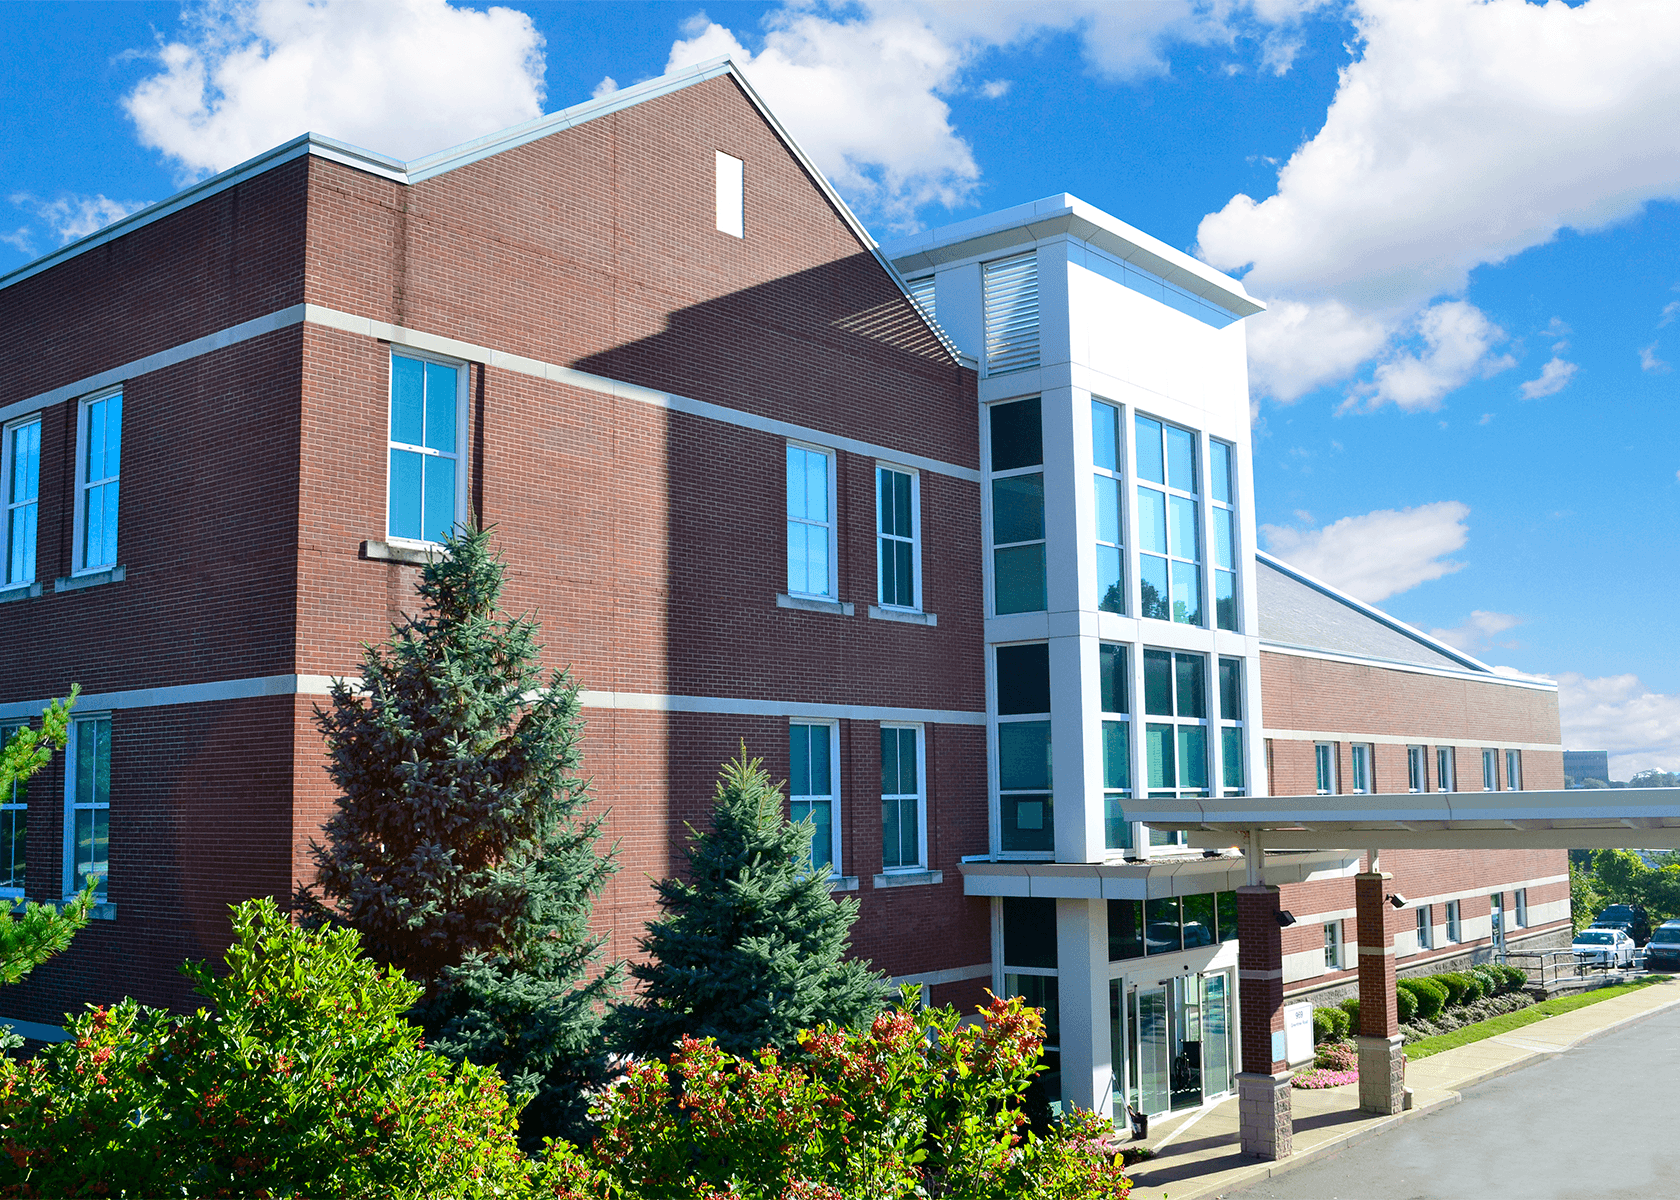 Exterior of Greentree Primary Care Facility